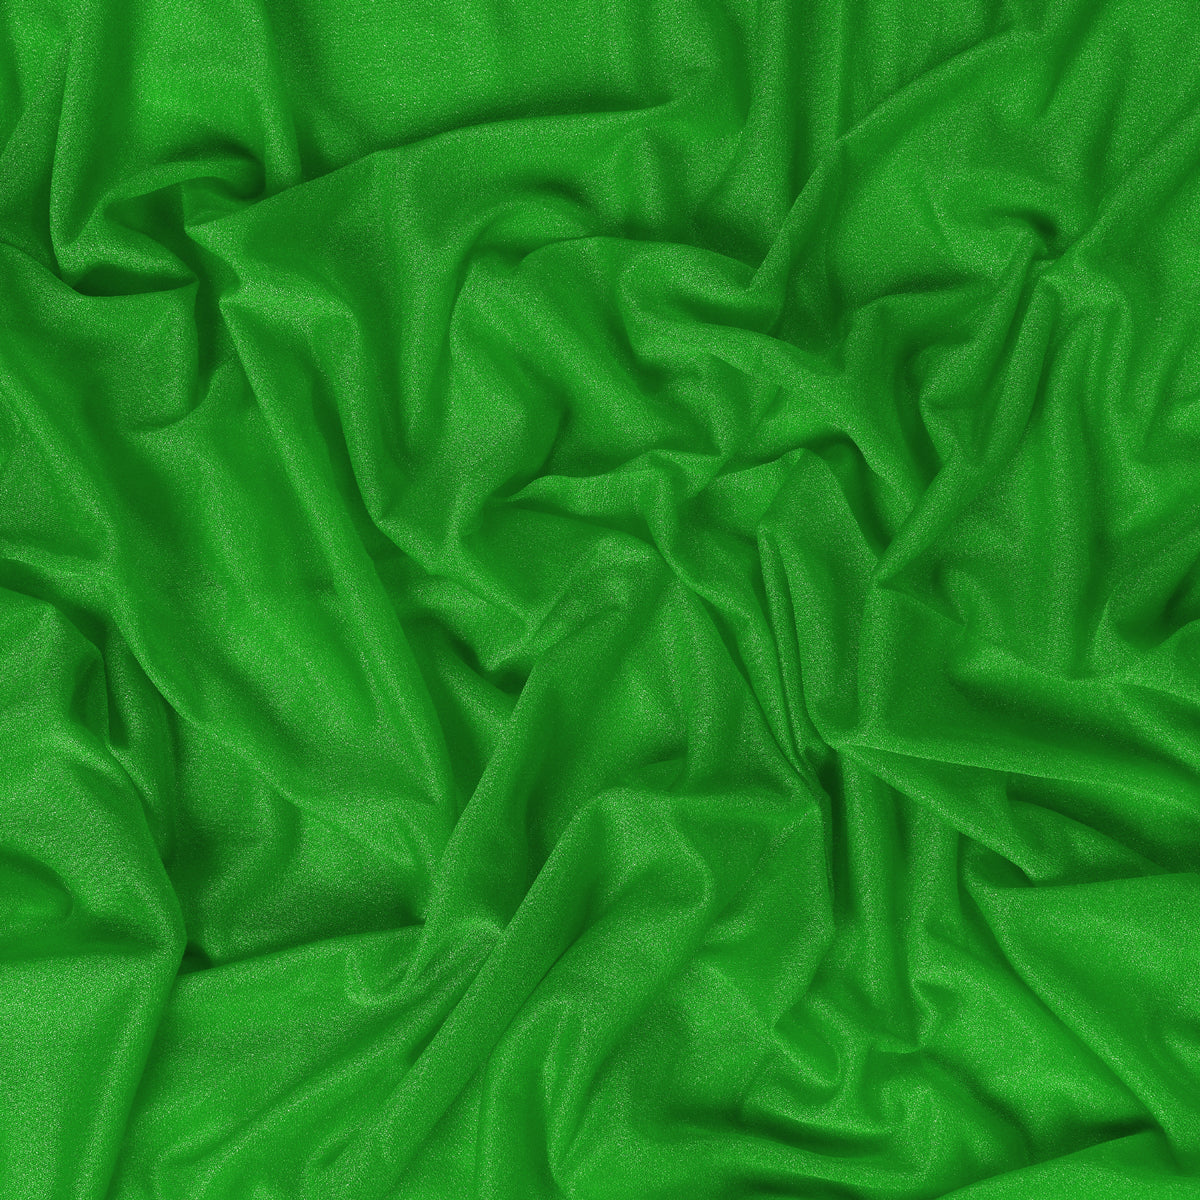 Green,917a9c90-72df-4ccd-b361-31ee9be77275